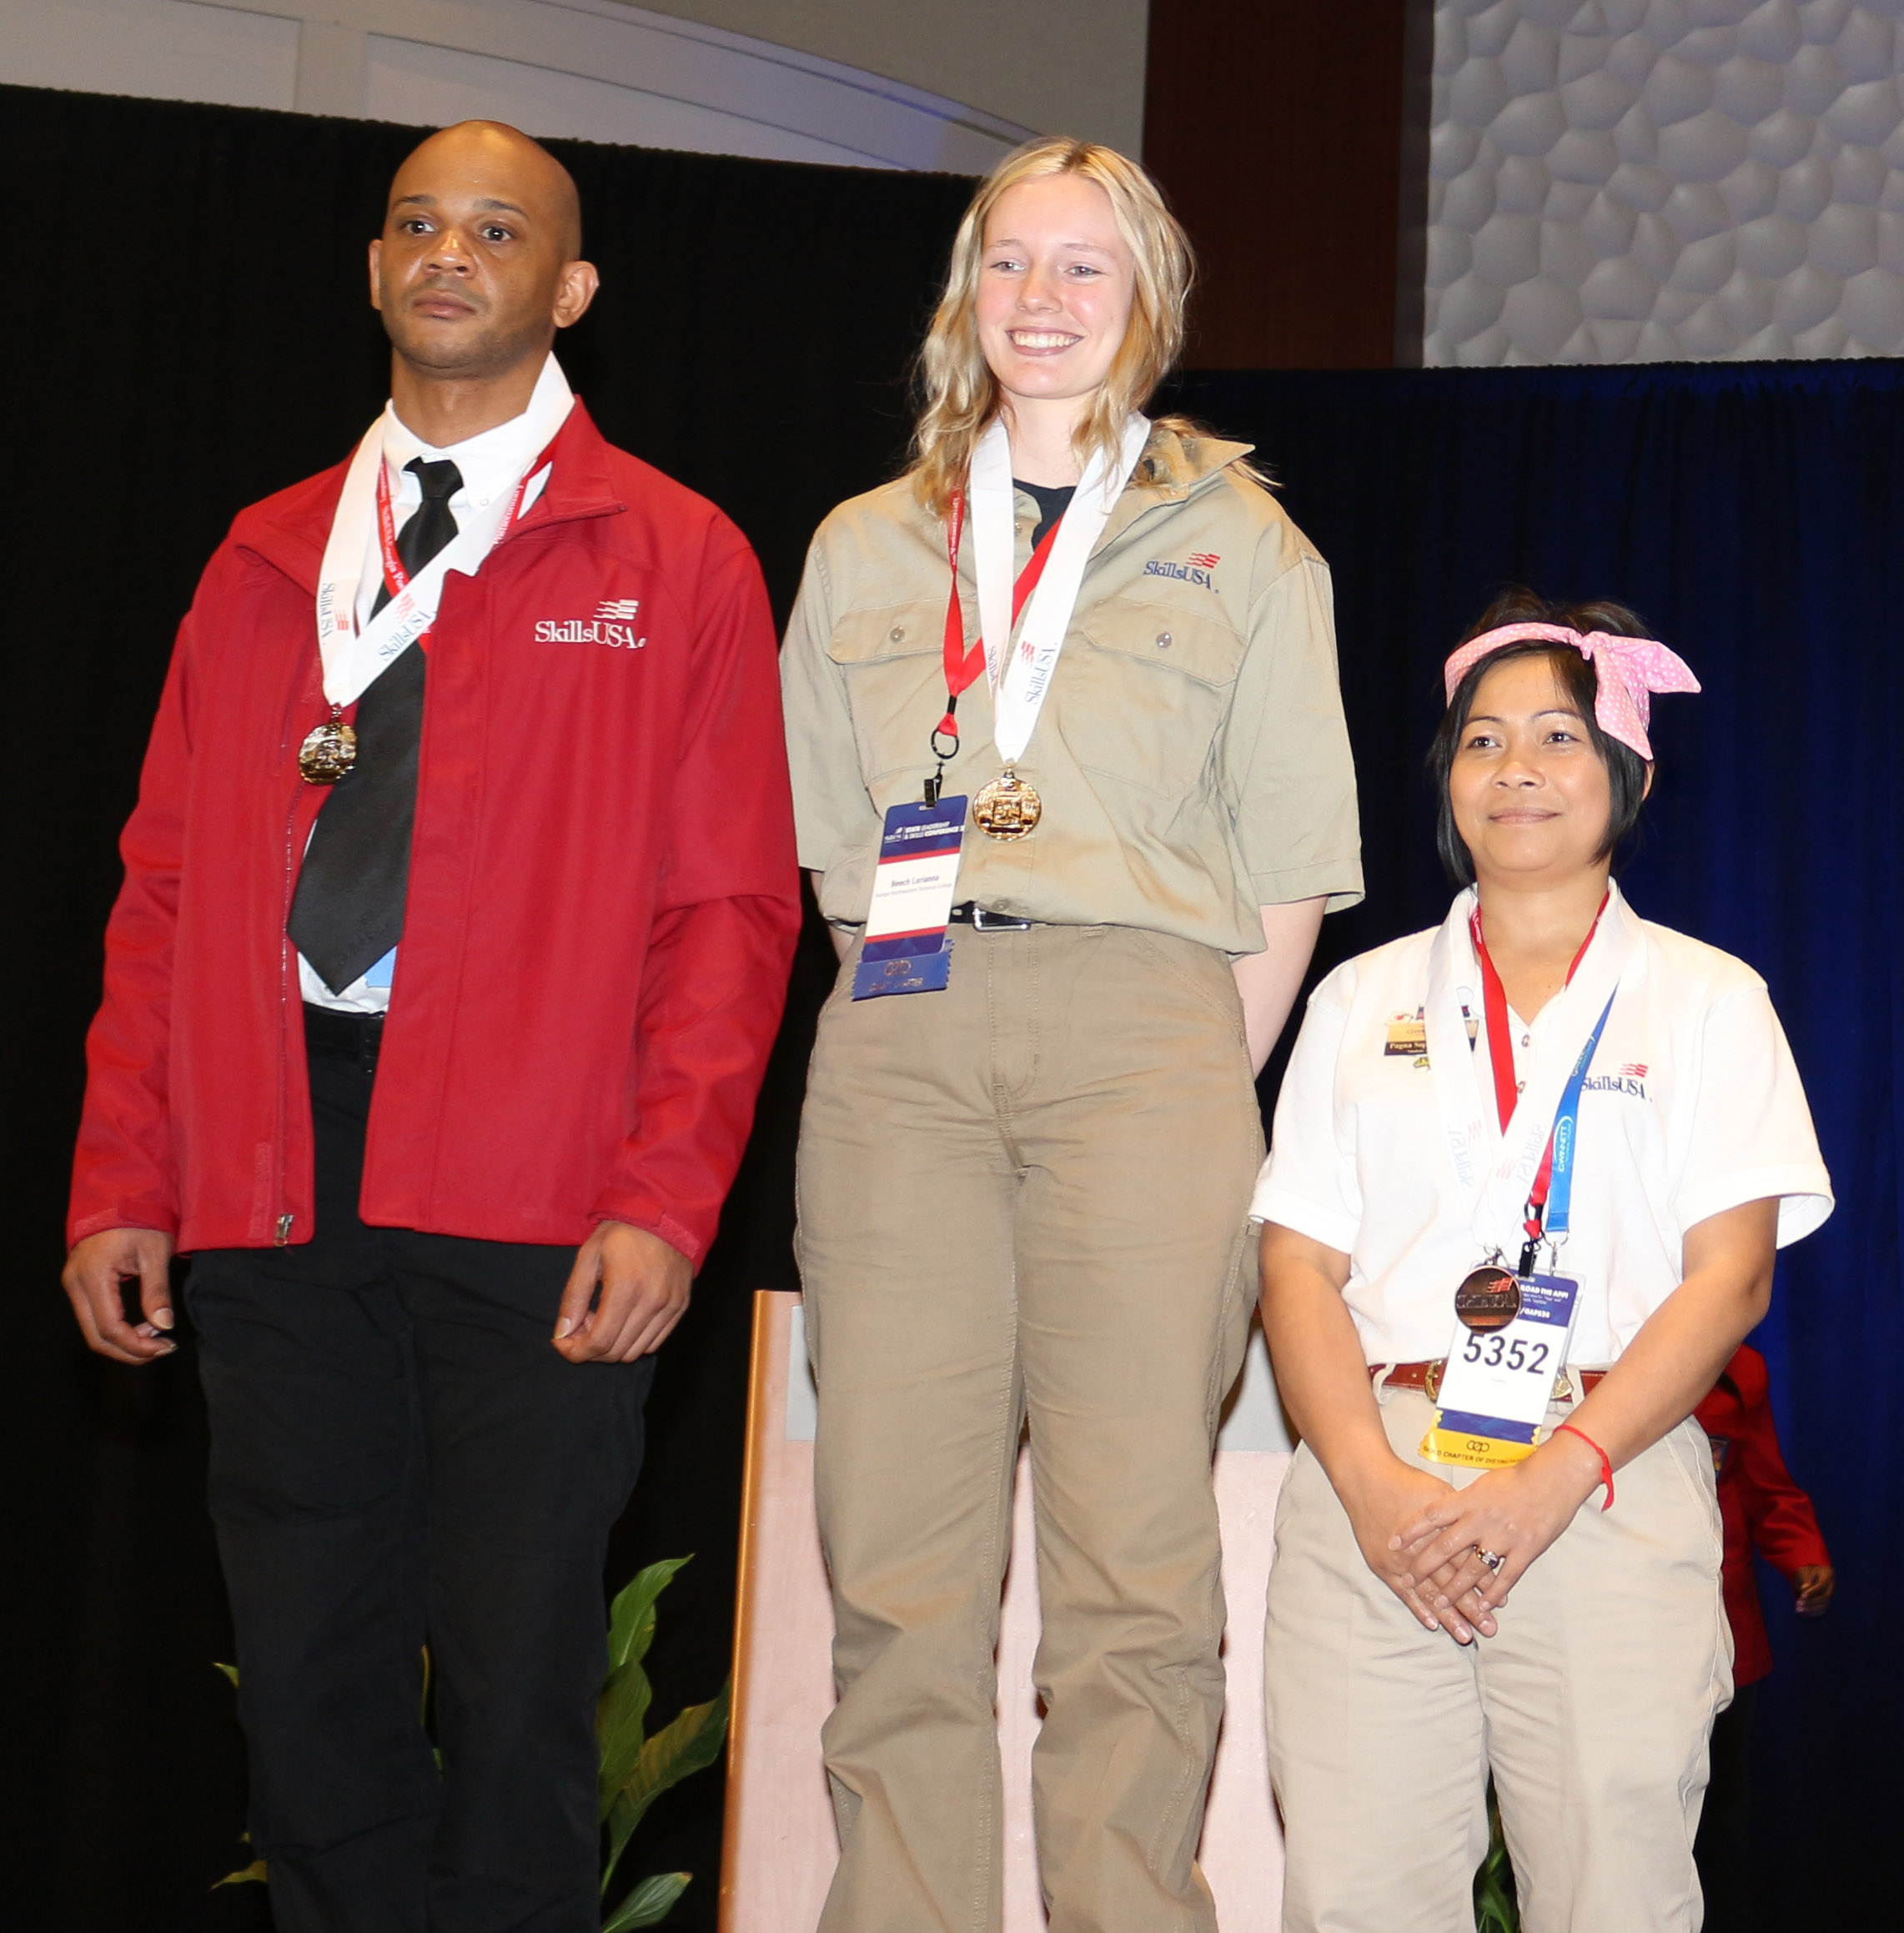 Lorianna Beech (center) receives the gold medal in Carpentry and will represent GNTC and the State of Georgia in the national contest June 17-21 in Atlanta.